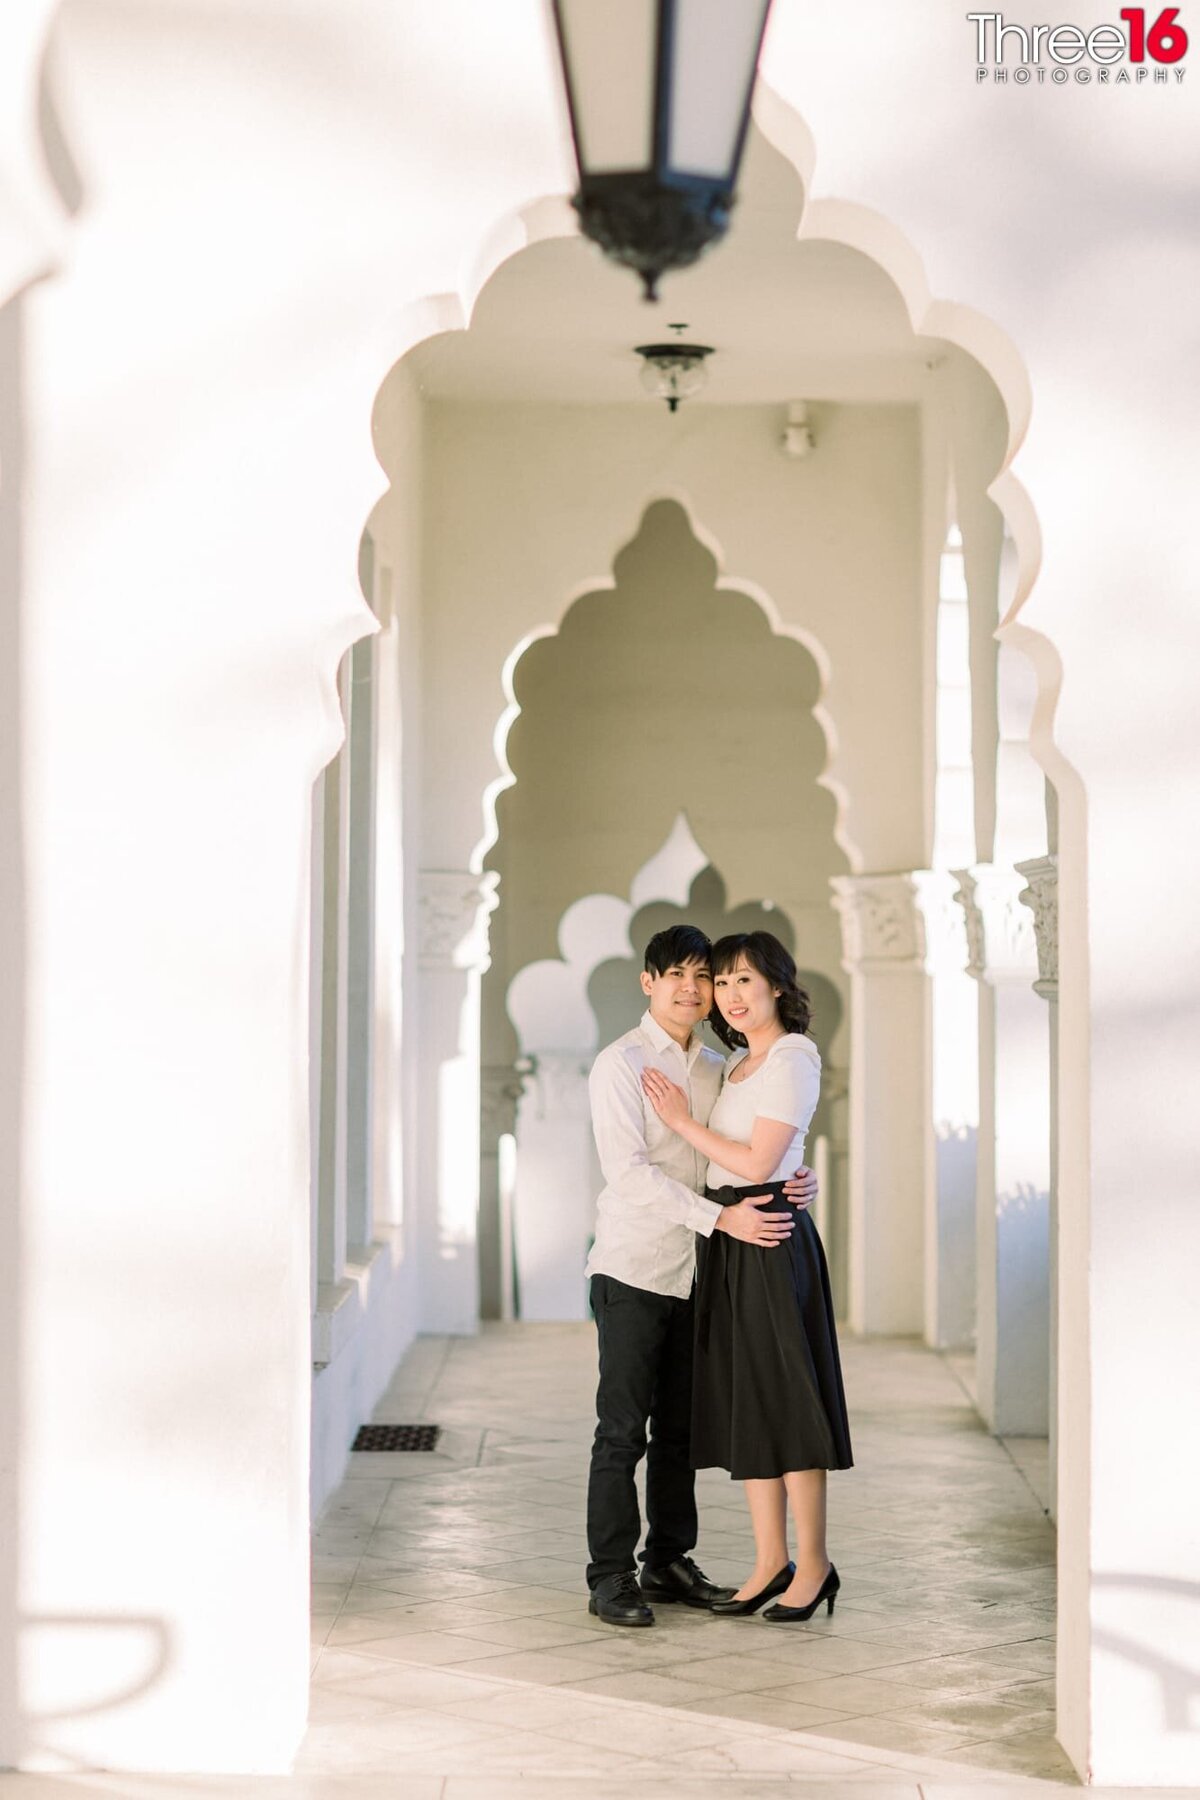 Brand Library Park Engagement Photos-1015